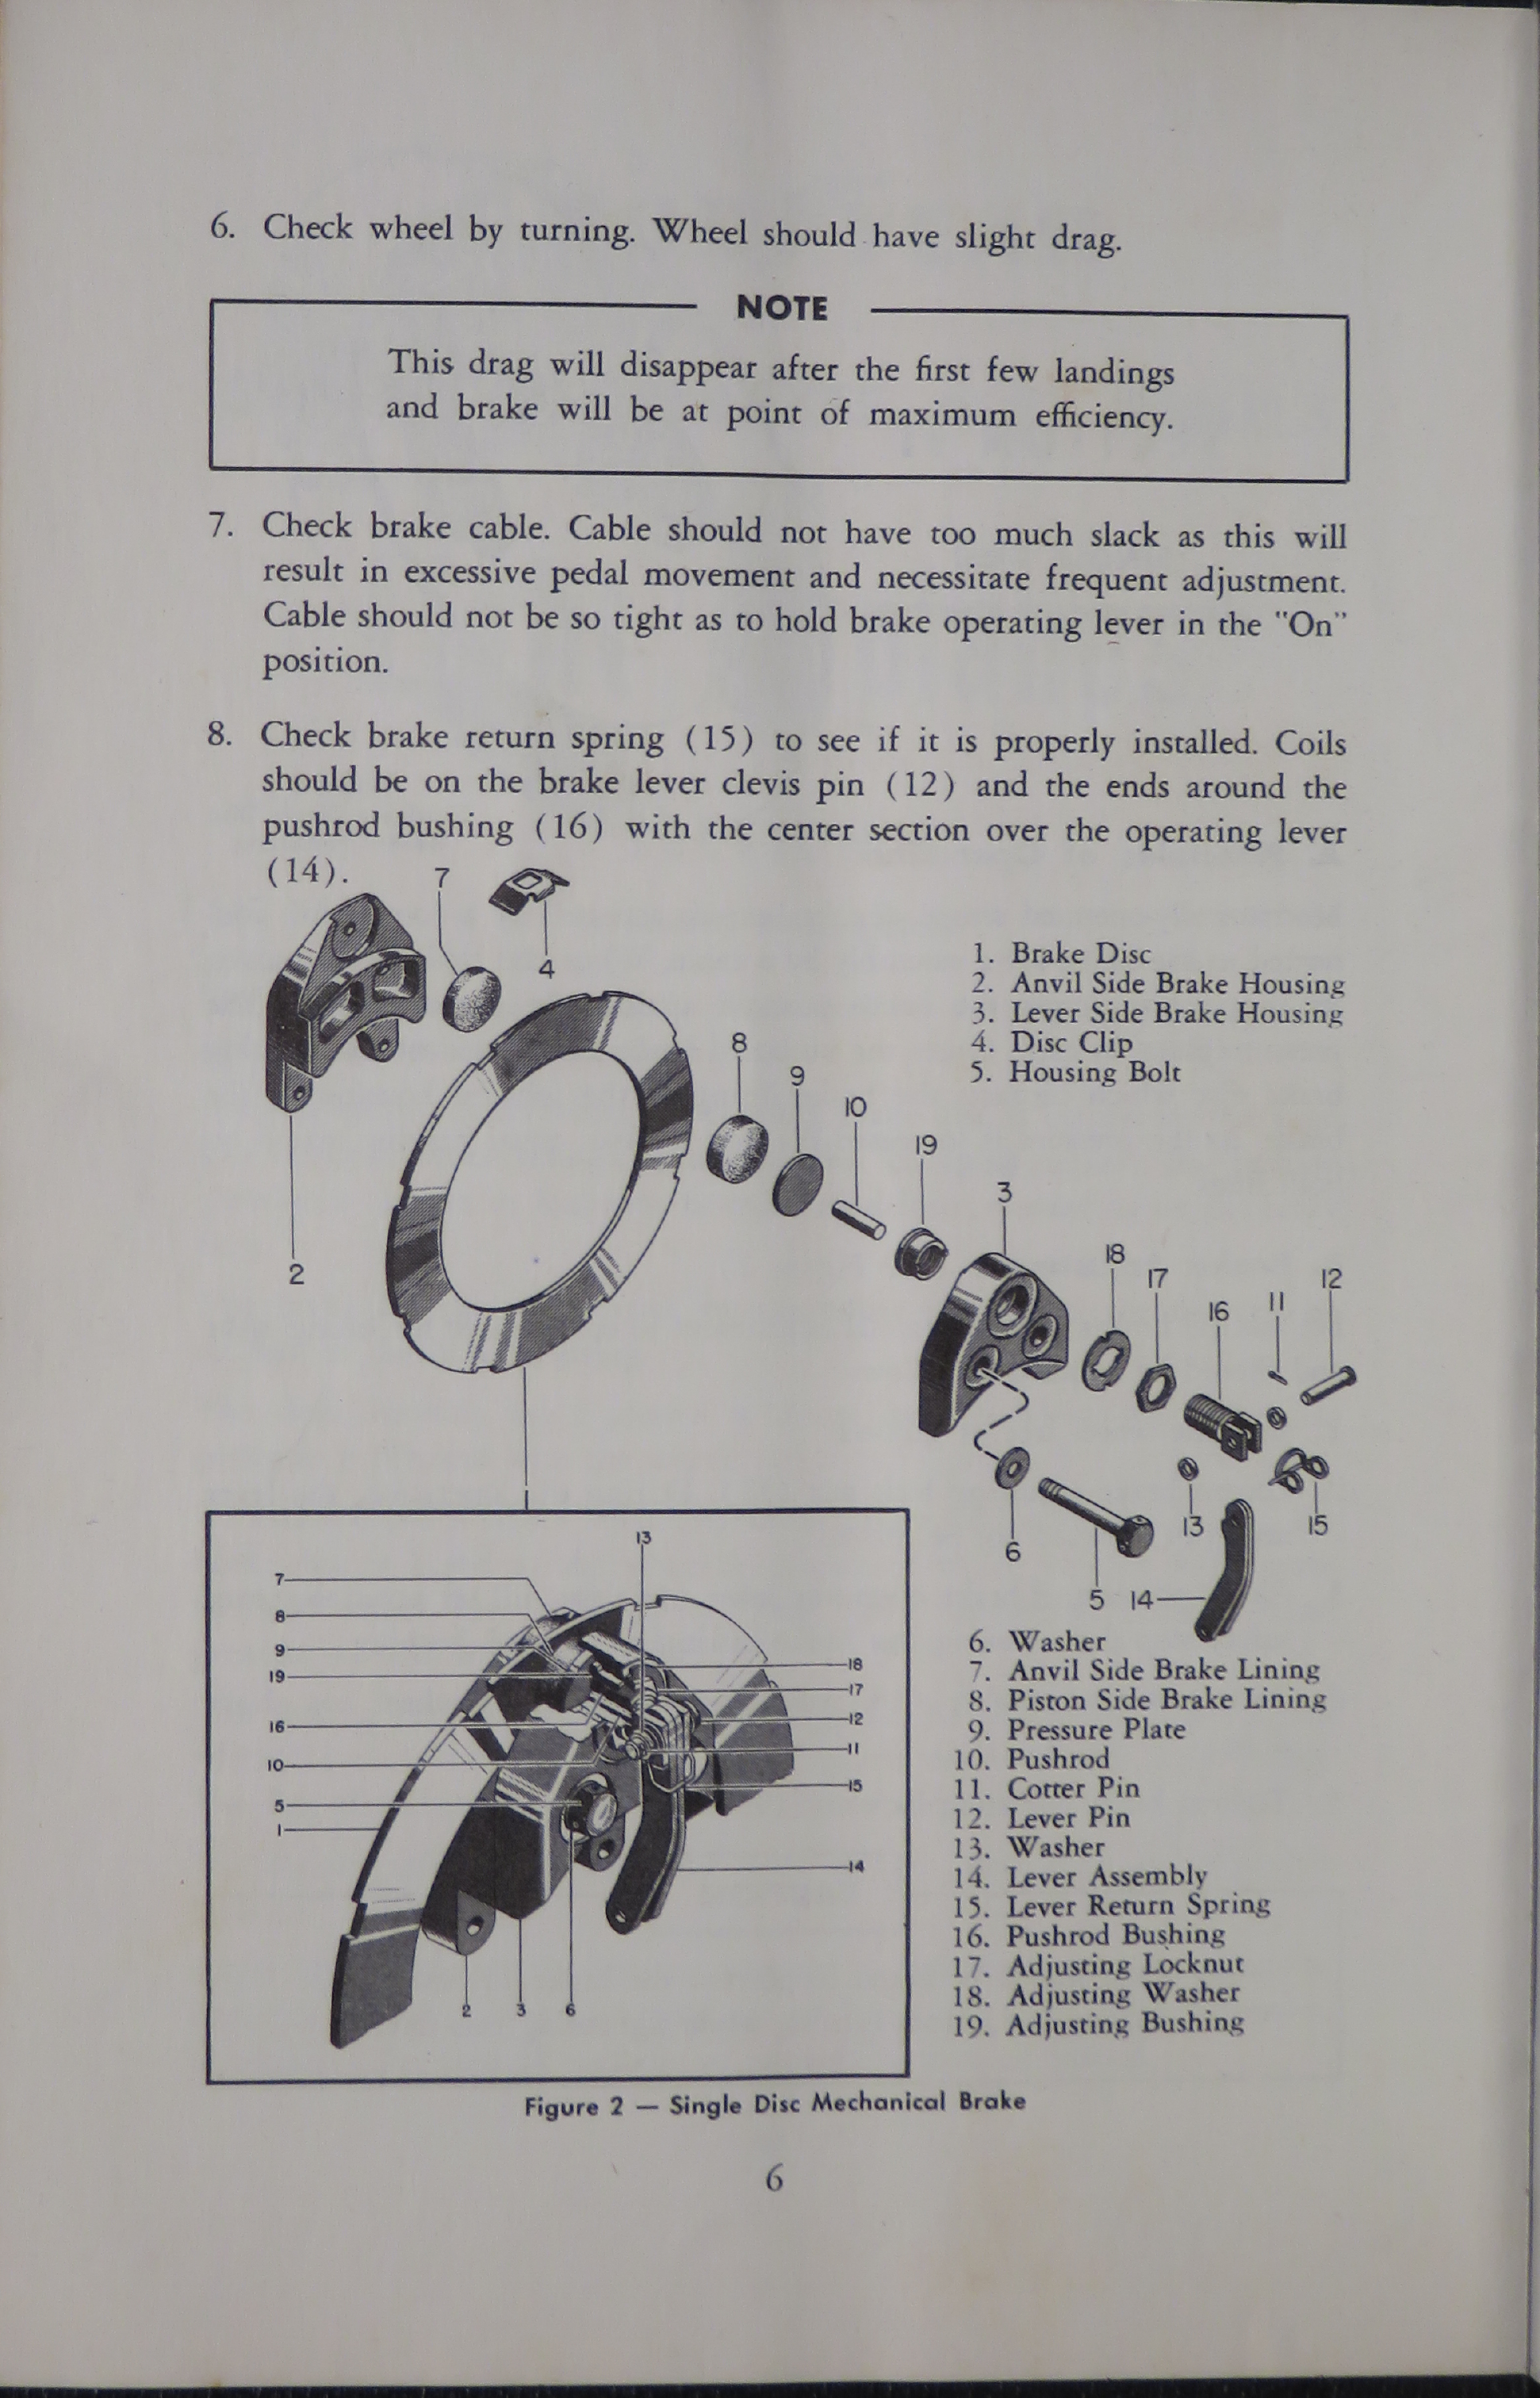 Sample page 8 from AirCorps Library document: Operation and Service Manual for Single Disc Brakes and Wheels for Light Airplanes